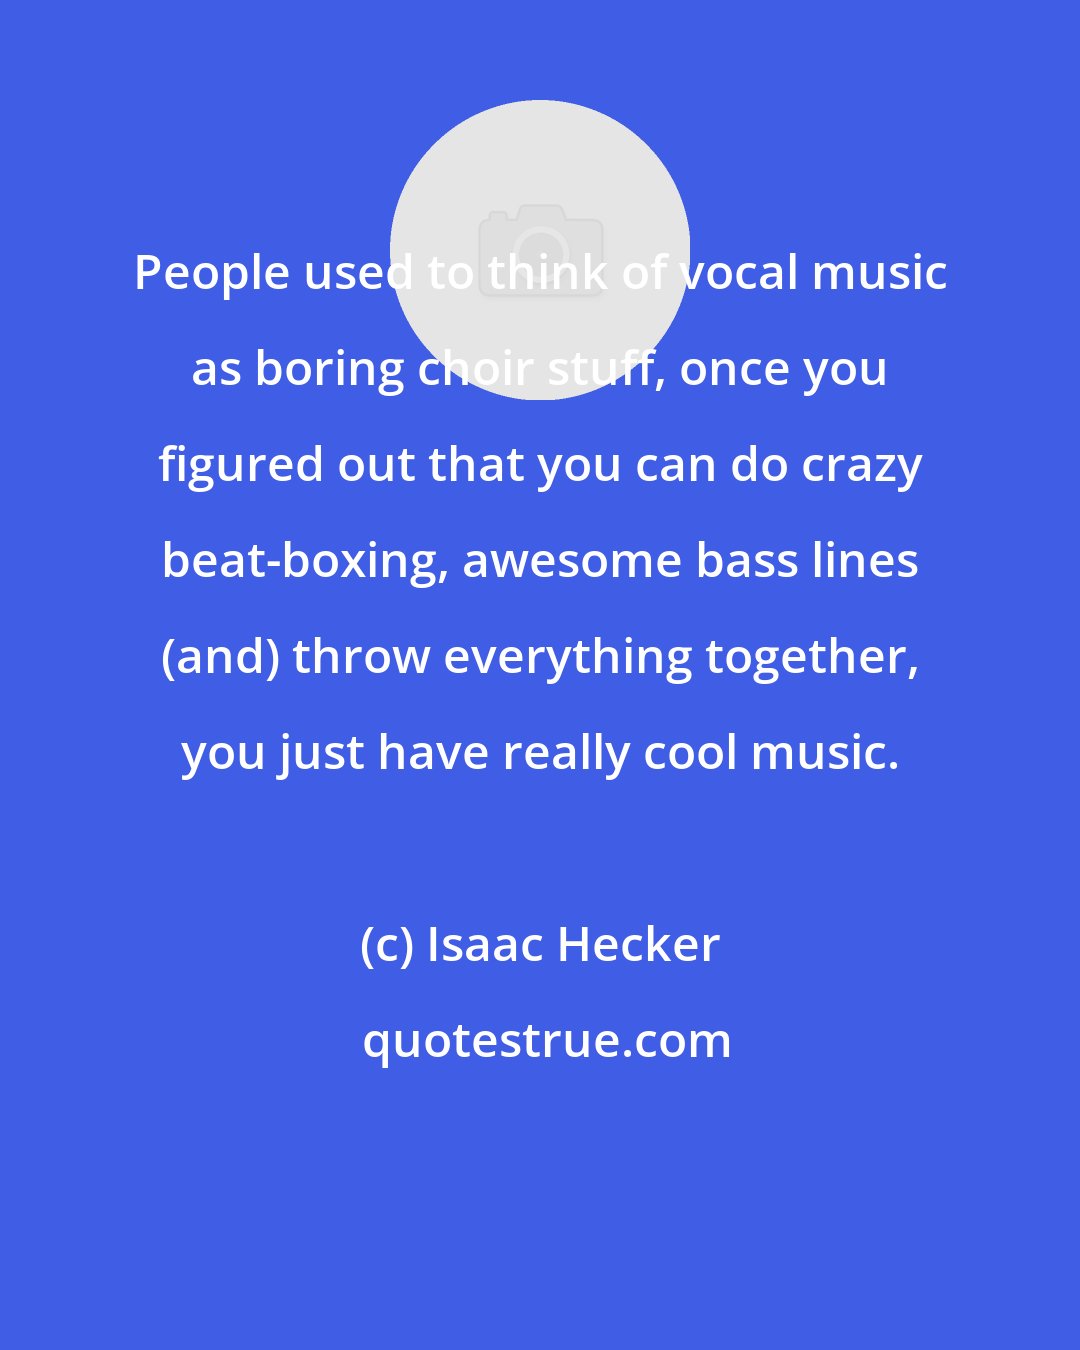 Isaac Hecker: People used to think of vocal music as boring choir stuff, once you figured out that you can do crazy beat-boxing, awesome bass lines (and) throw everything together, you just have really cool music.